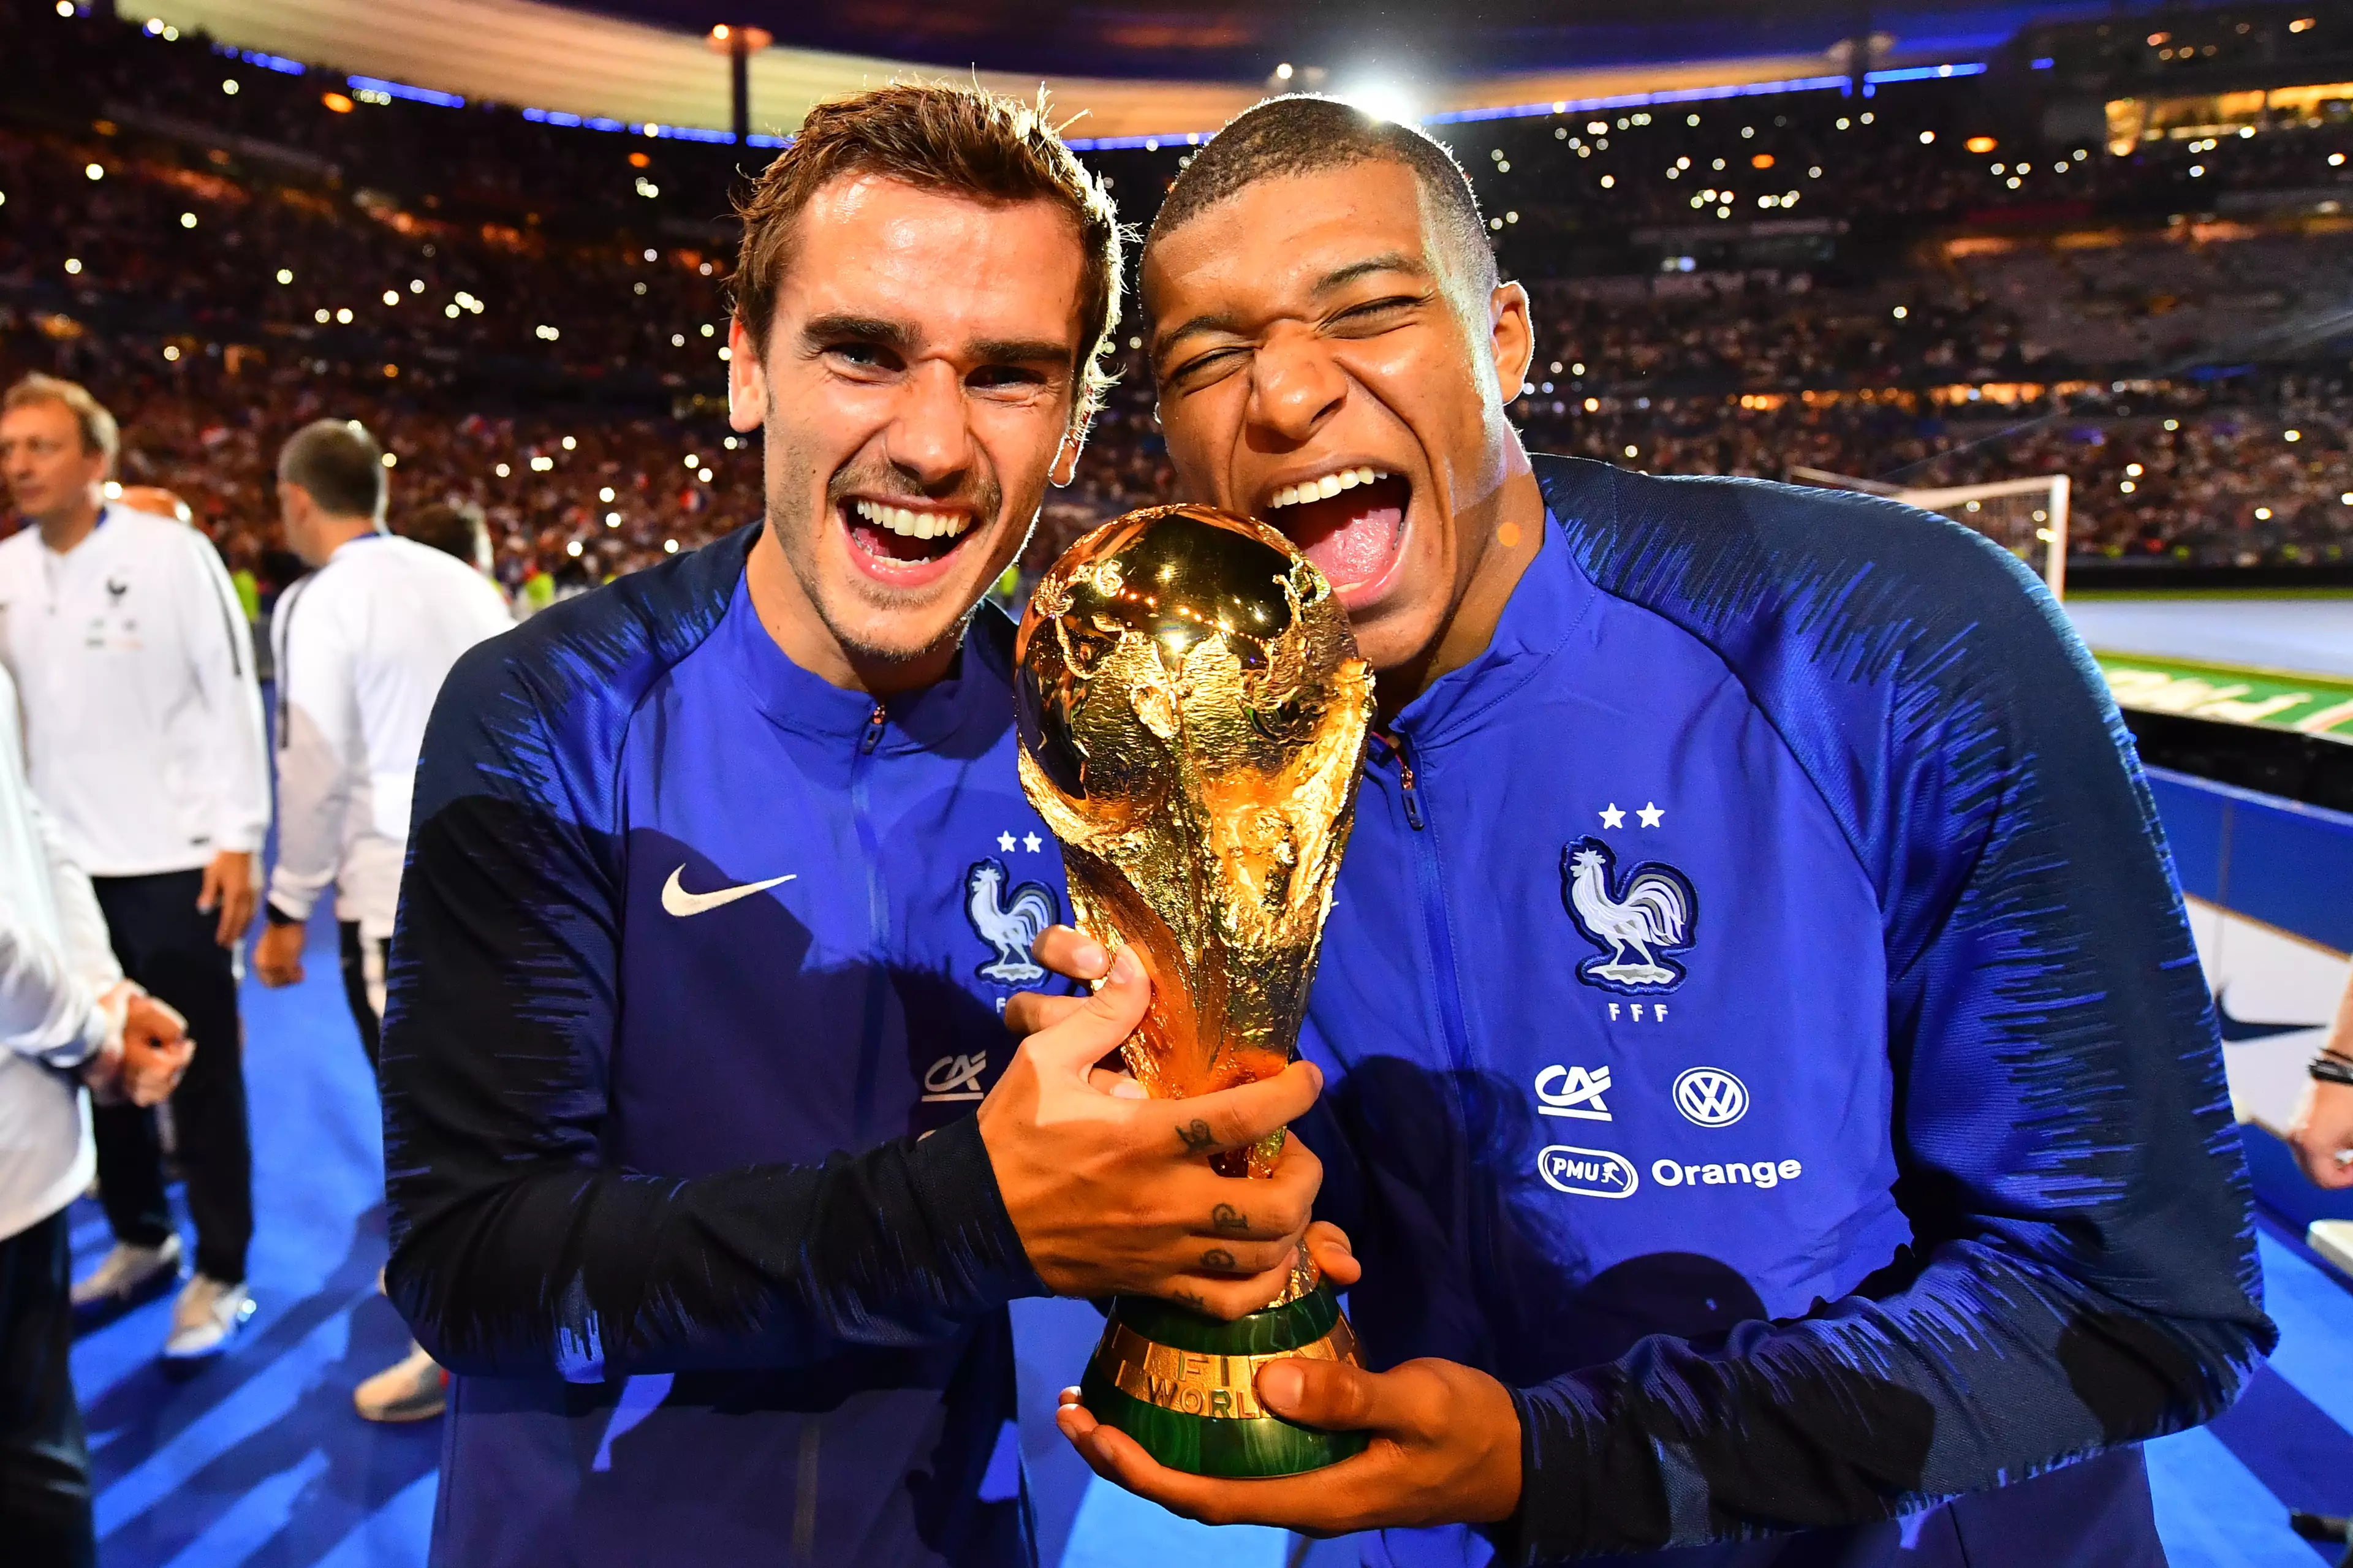 Mbappe's World Cup win put him ahead of Neymar. Image: PA Images